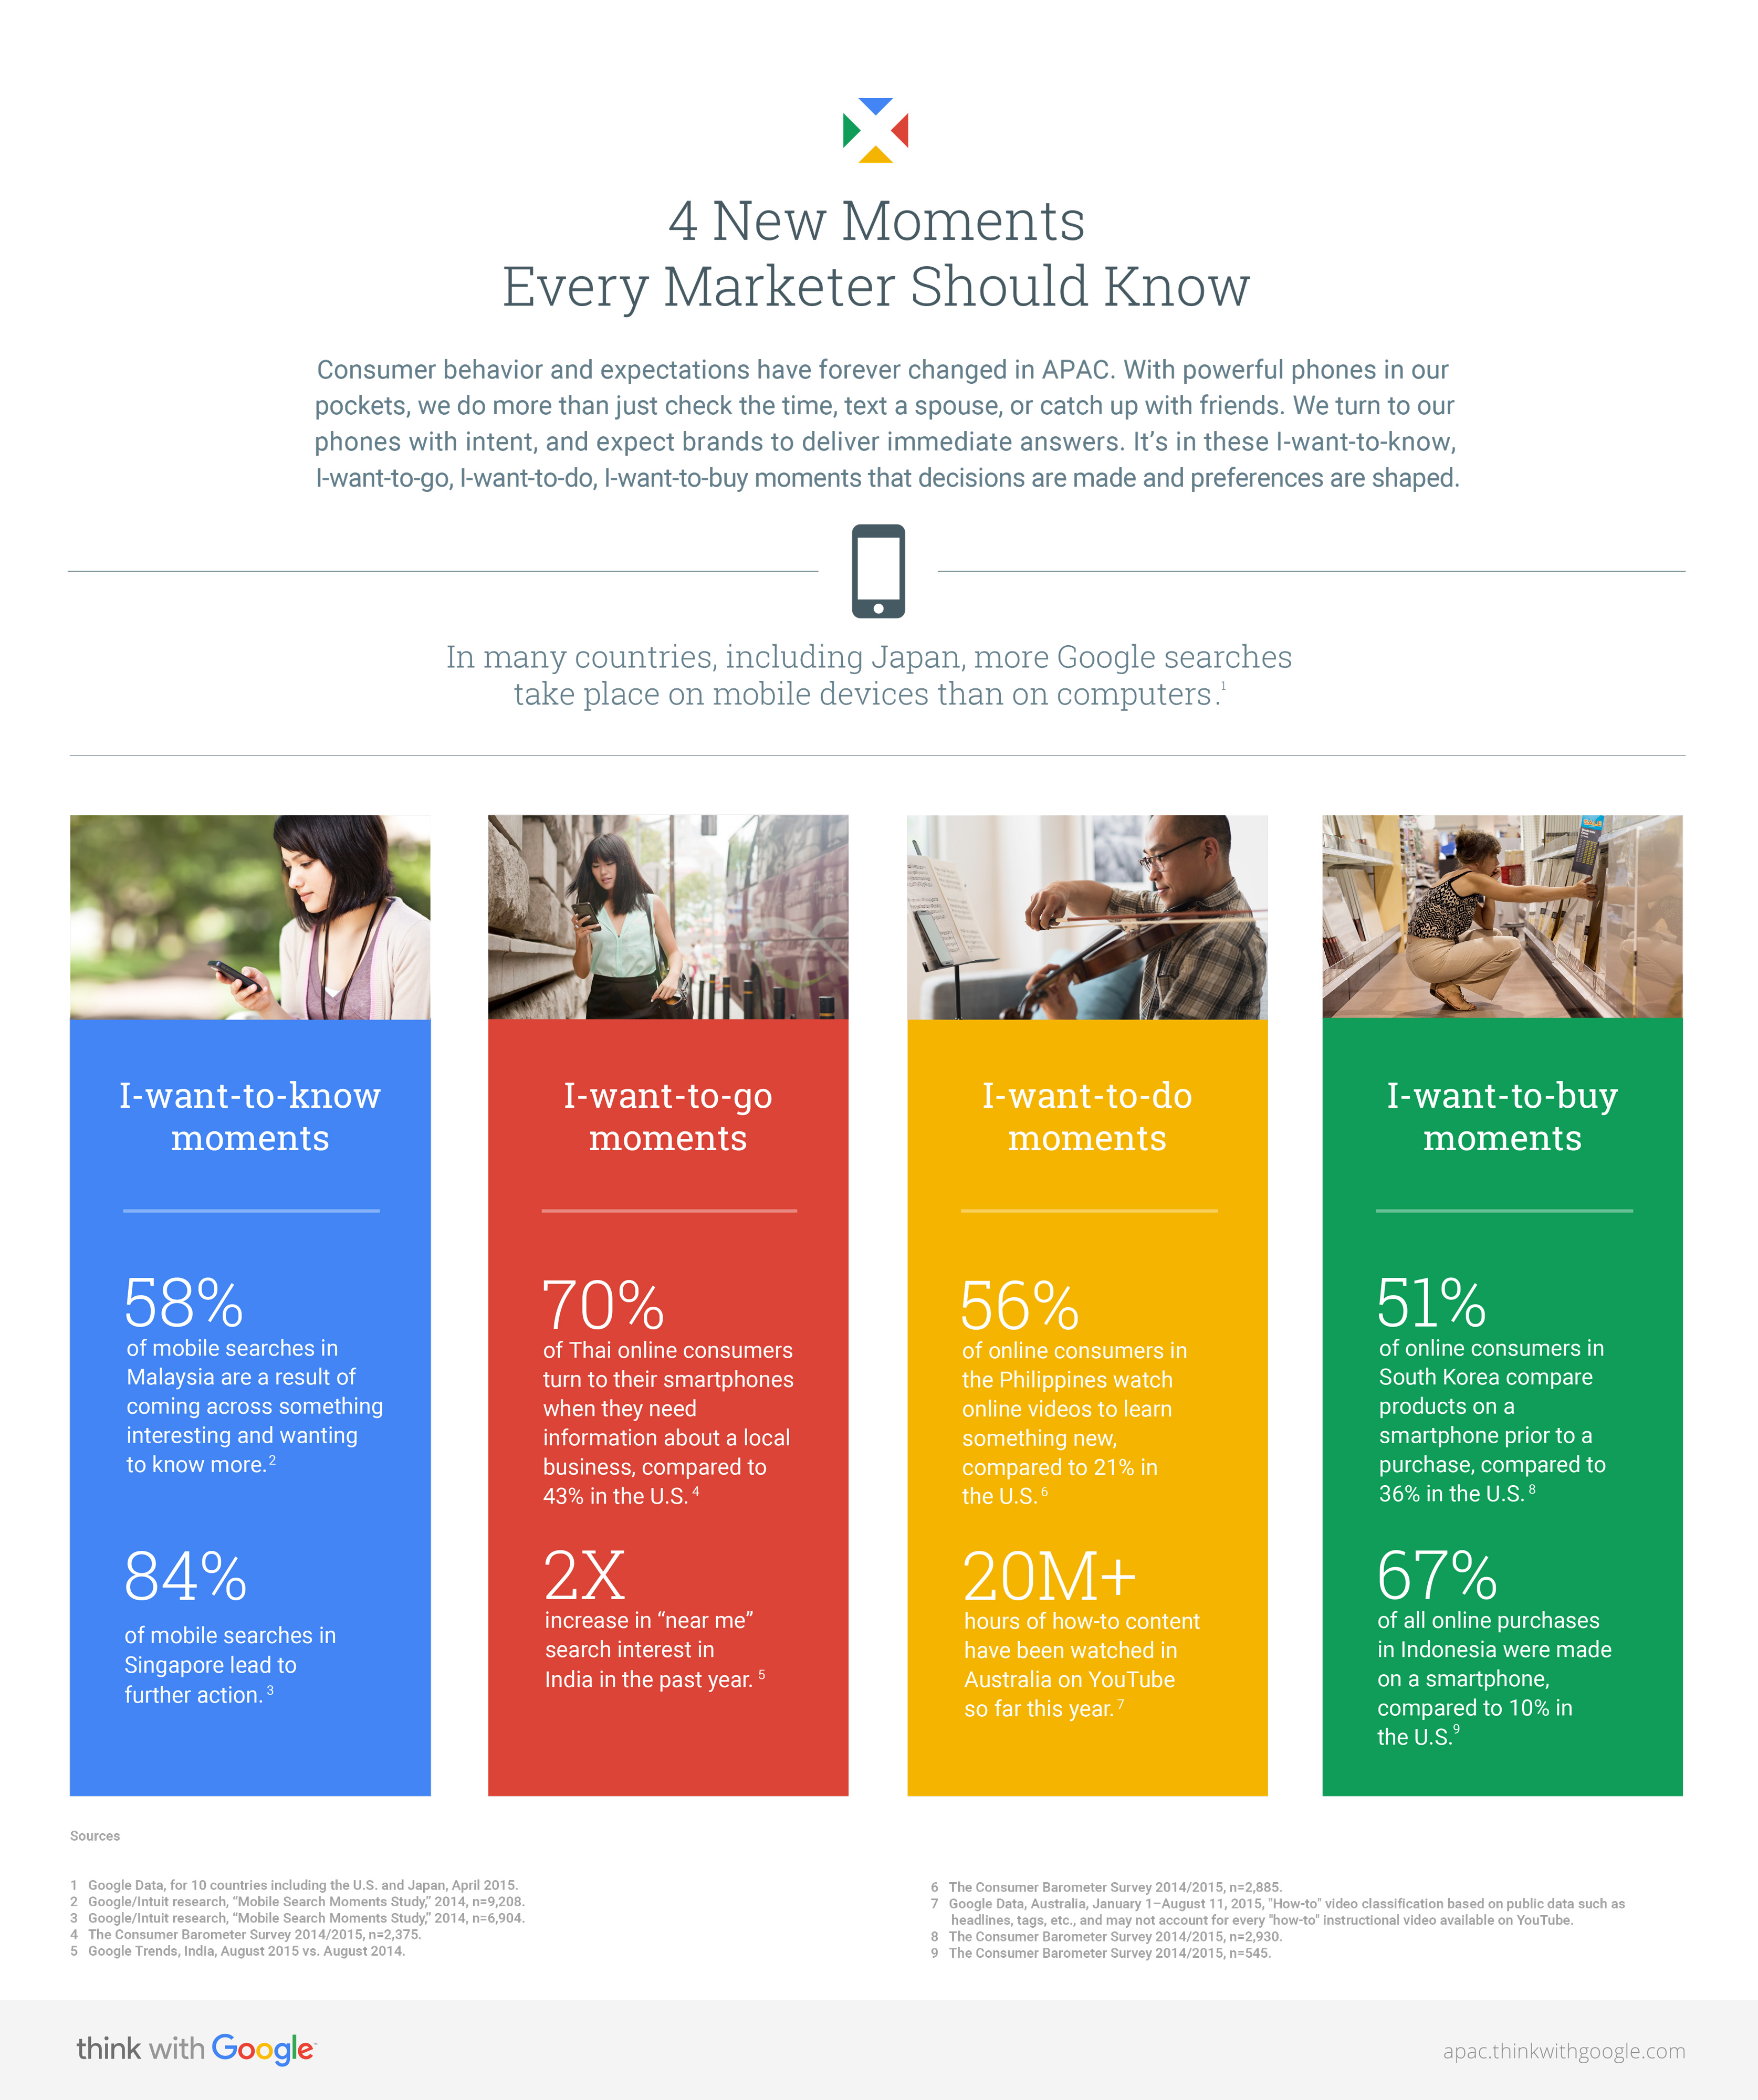 4-new-moments-every-marketer-should-know